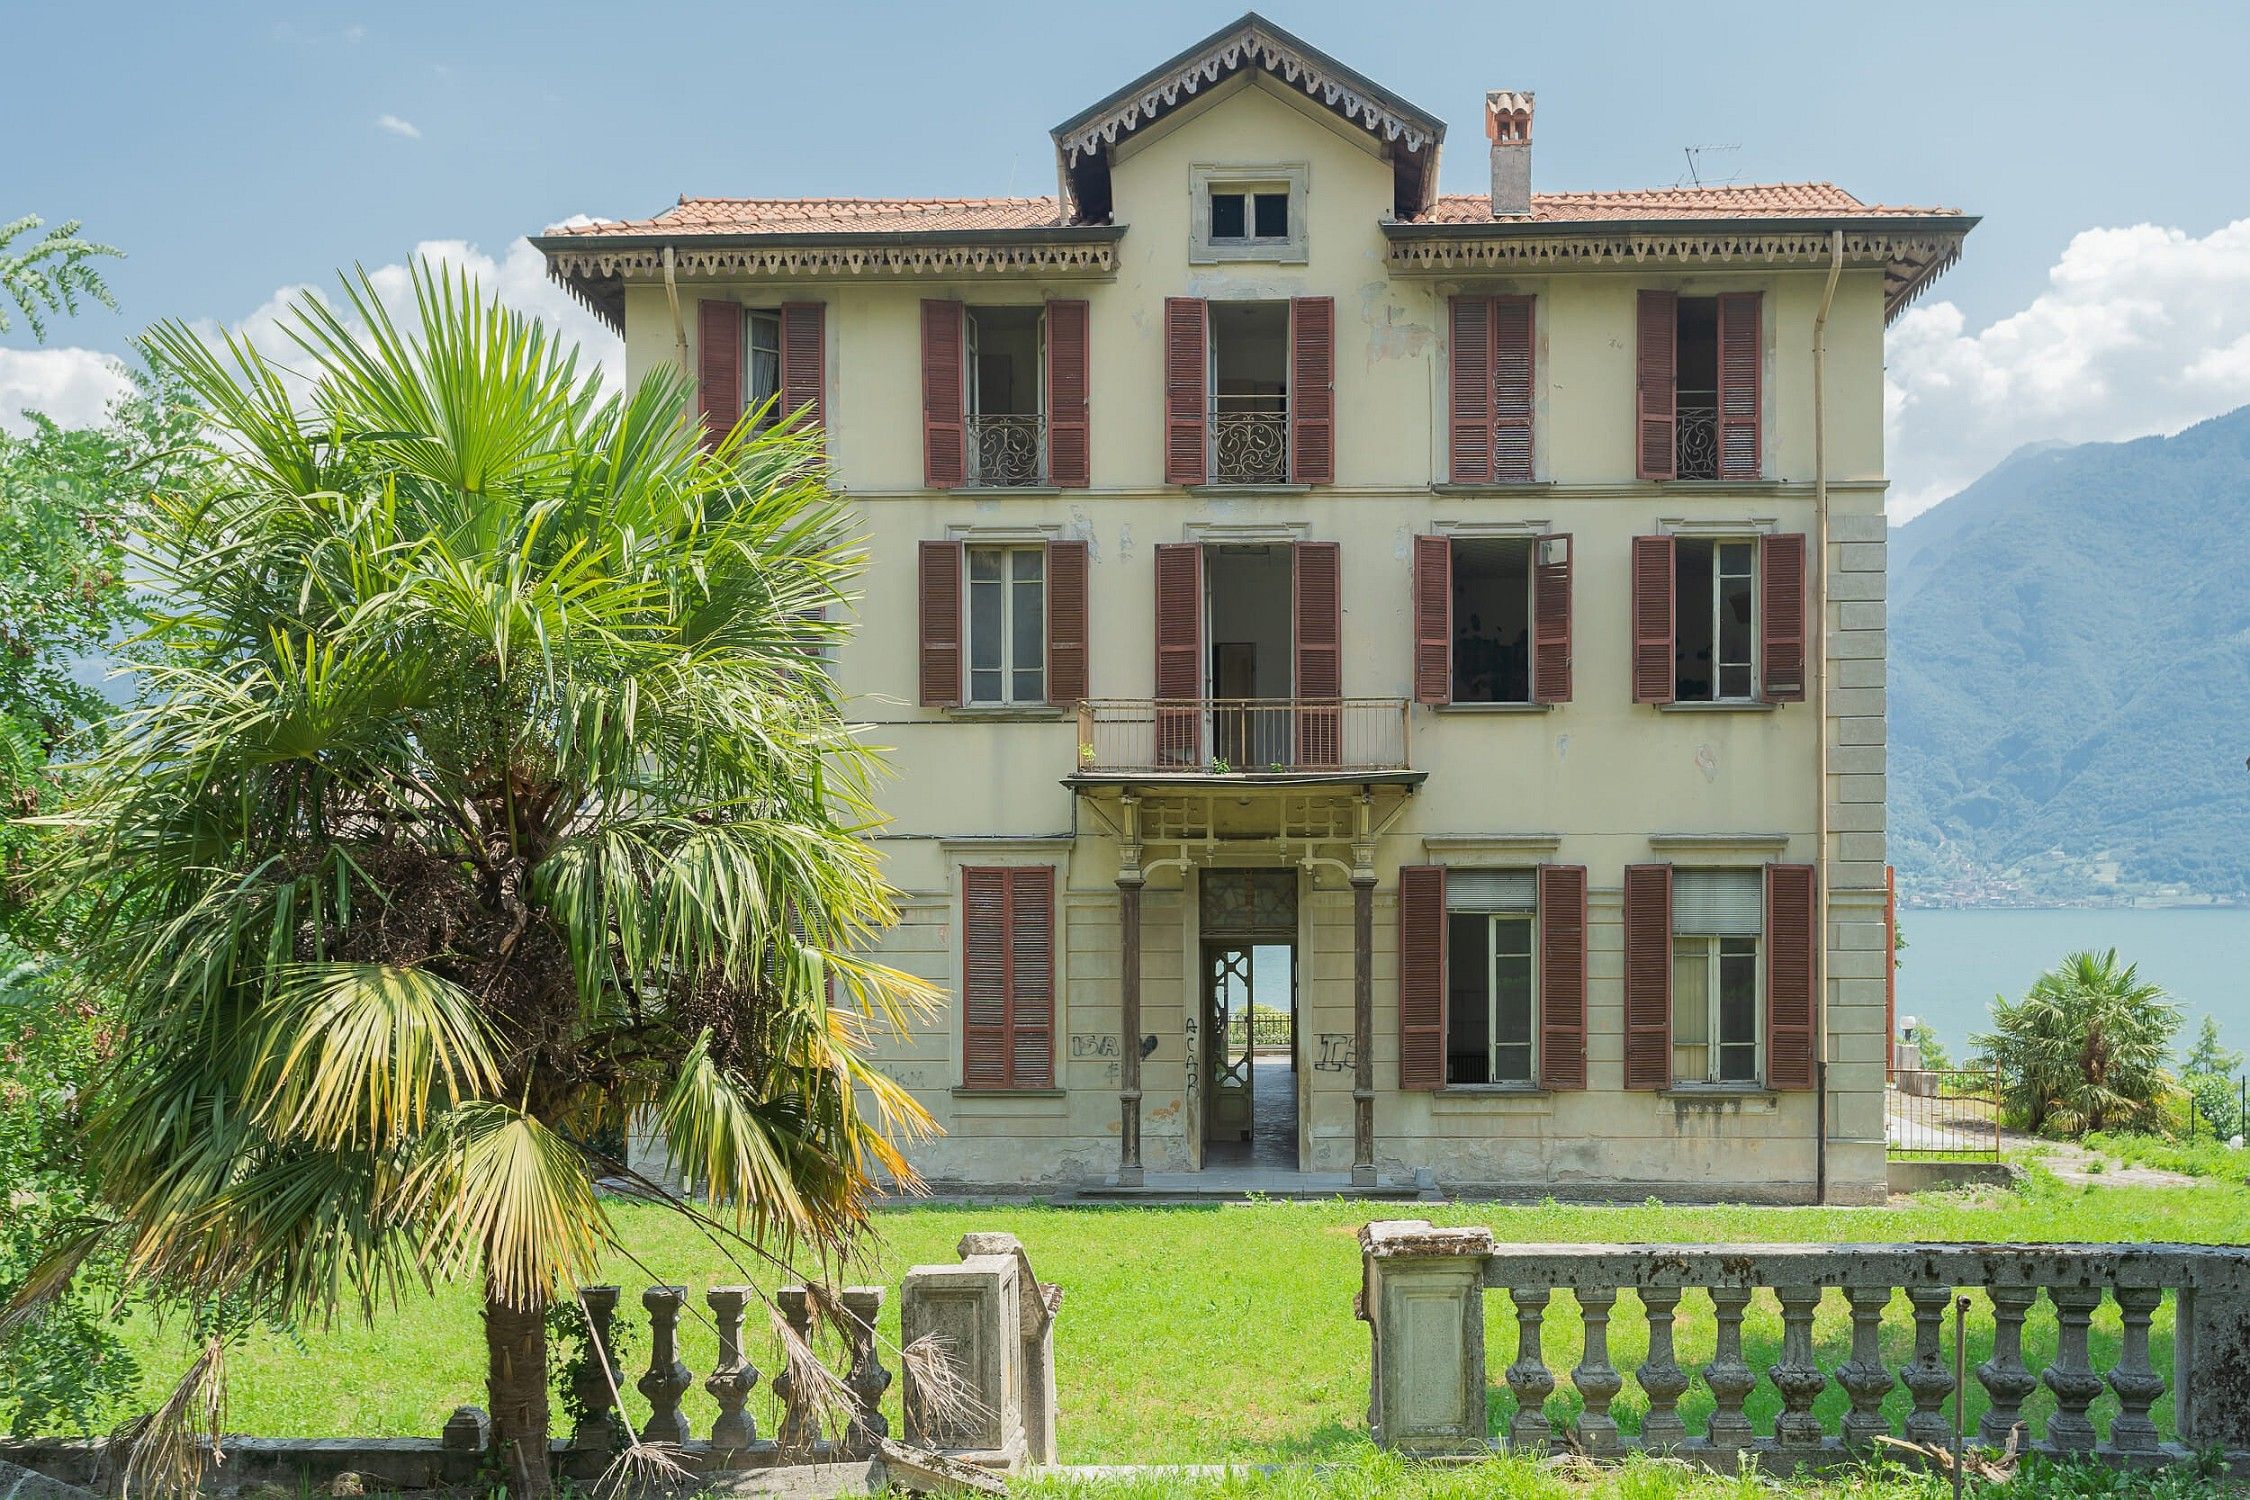 Photos Period villa in Lovere on Lake Iseo / Lago d'Iseo